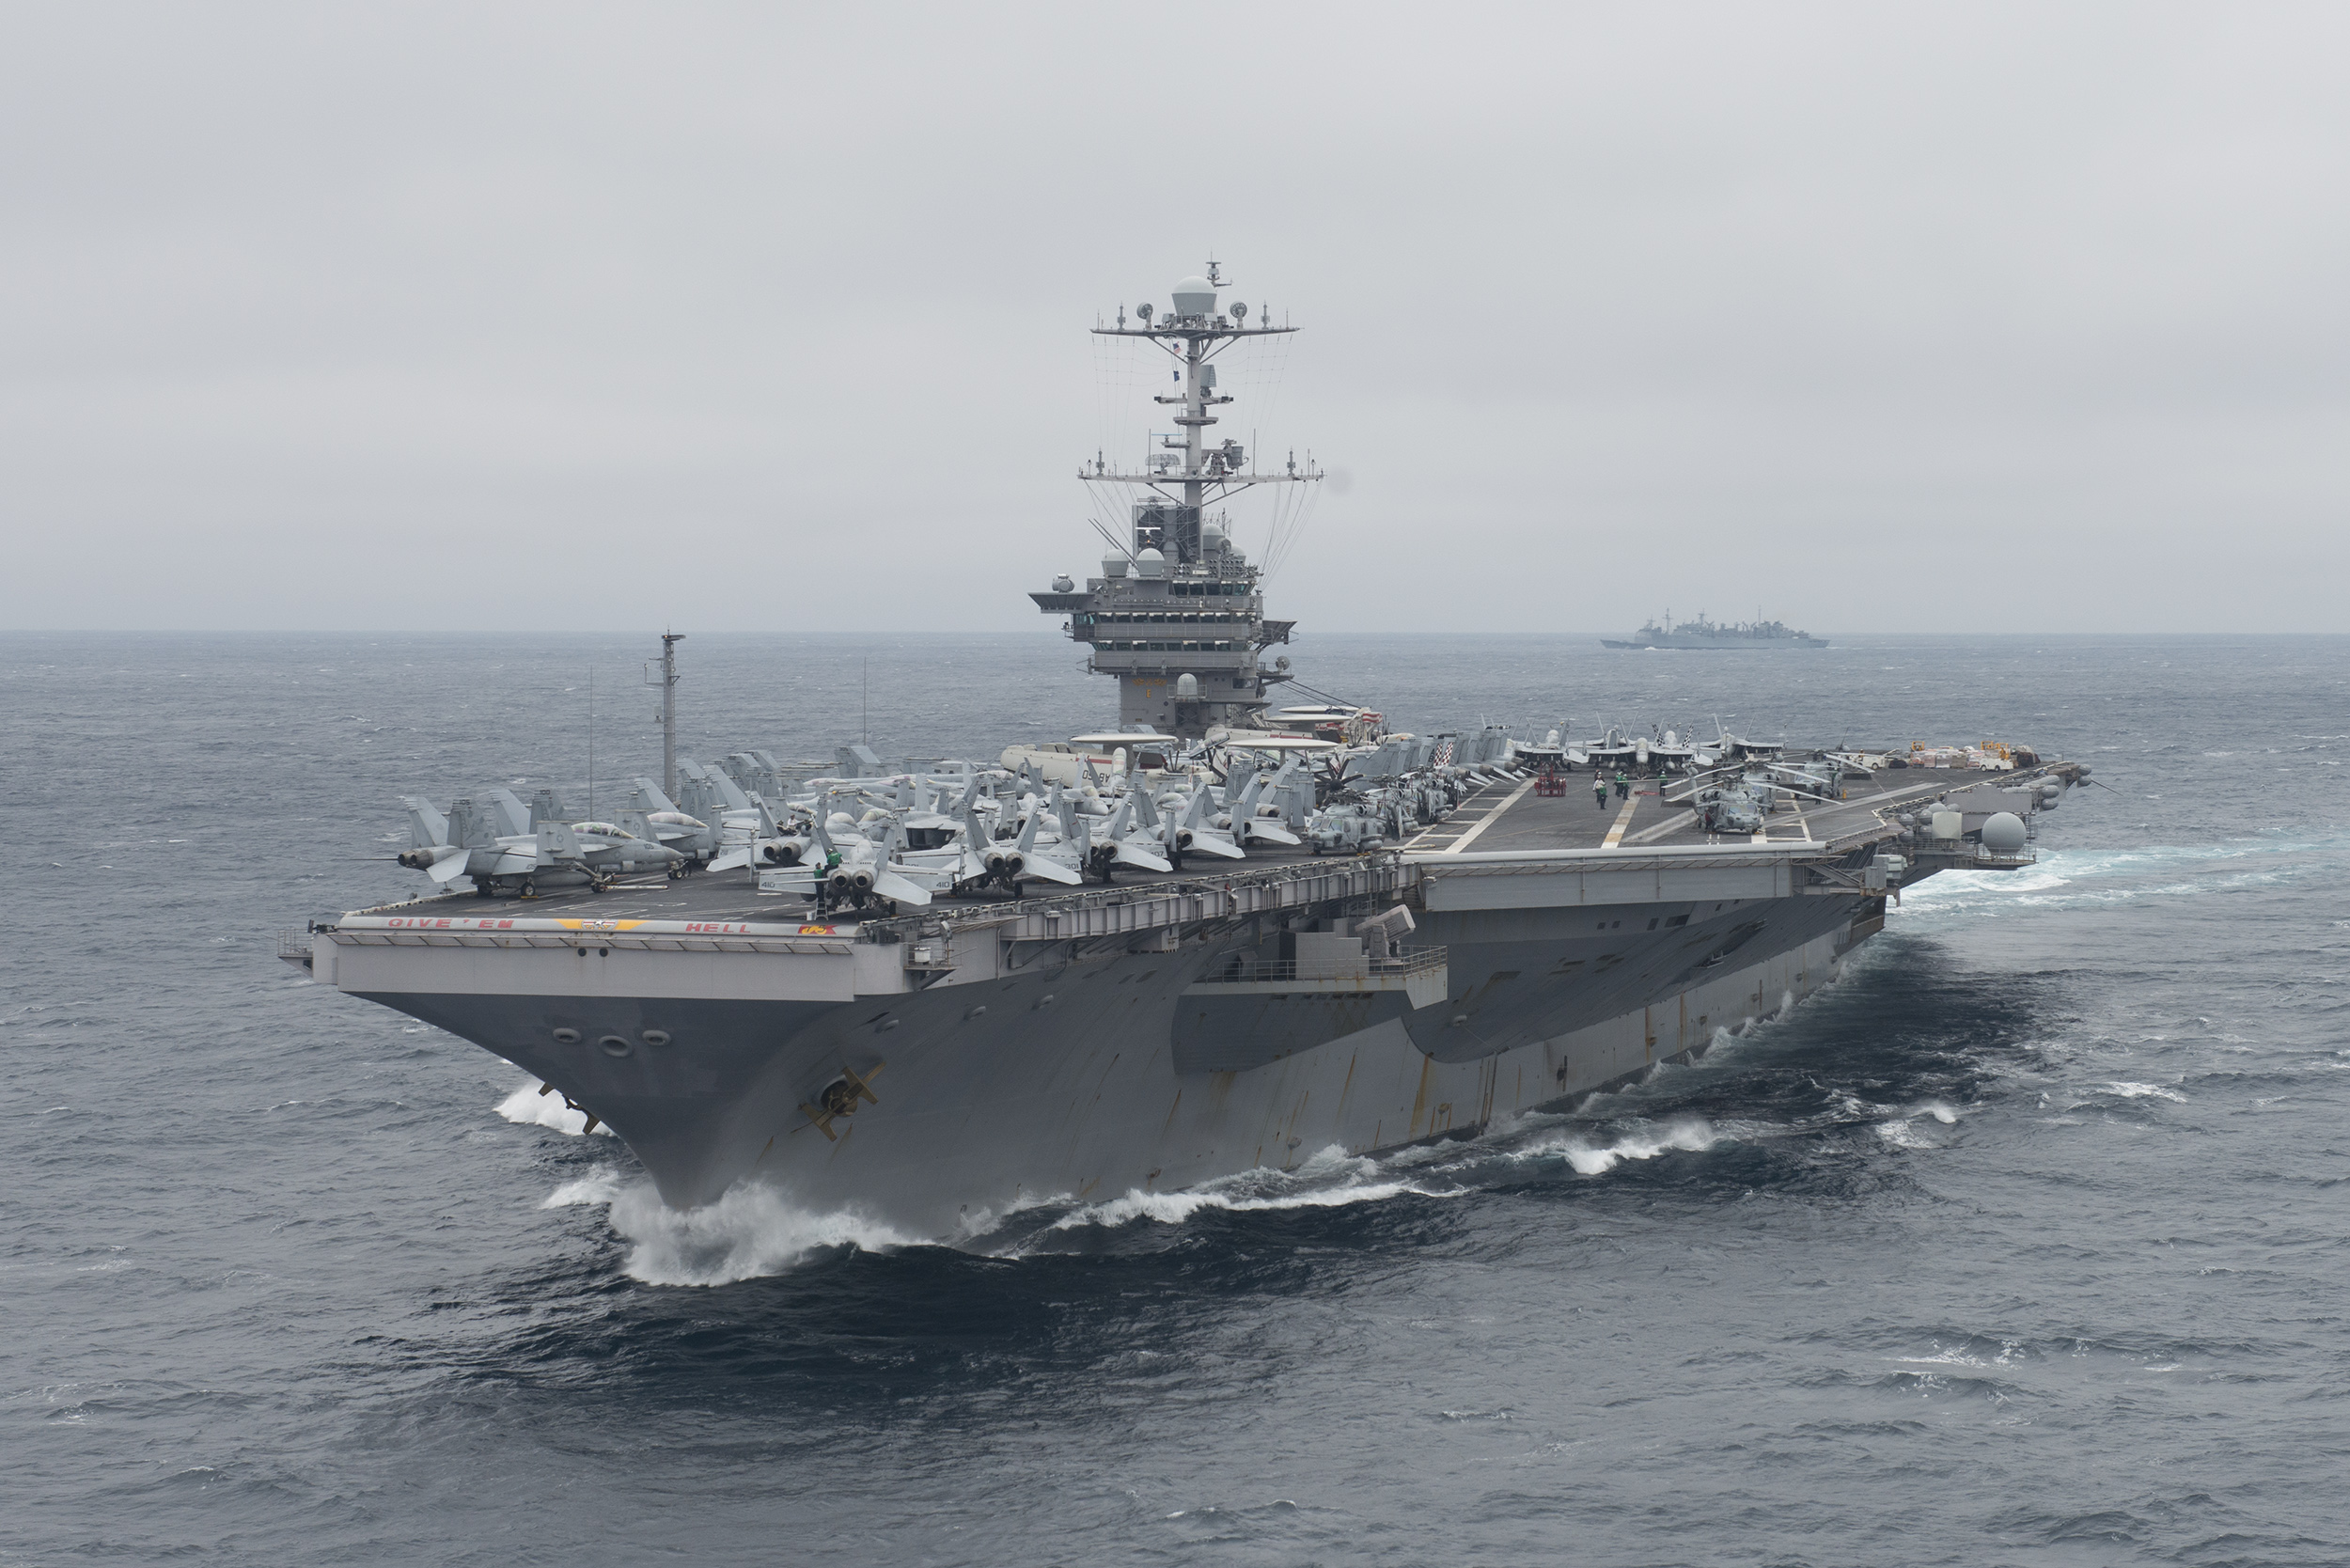 Atlantic Ocean (Feb. 14, 2018) The aircraft carrier USS Harry S. Truman (CVN 75) transits the Atlantic Ocean while conducting its composite training unit exercise (COMPTUEX). Truman is underway for COMPTUEX, which evaluates the strike group's ability as a whole to carry out sustained combat operations from the sea, ultimately certifying the Harry S. Truman Carrier Strike Group for deployment. -